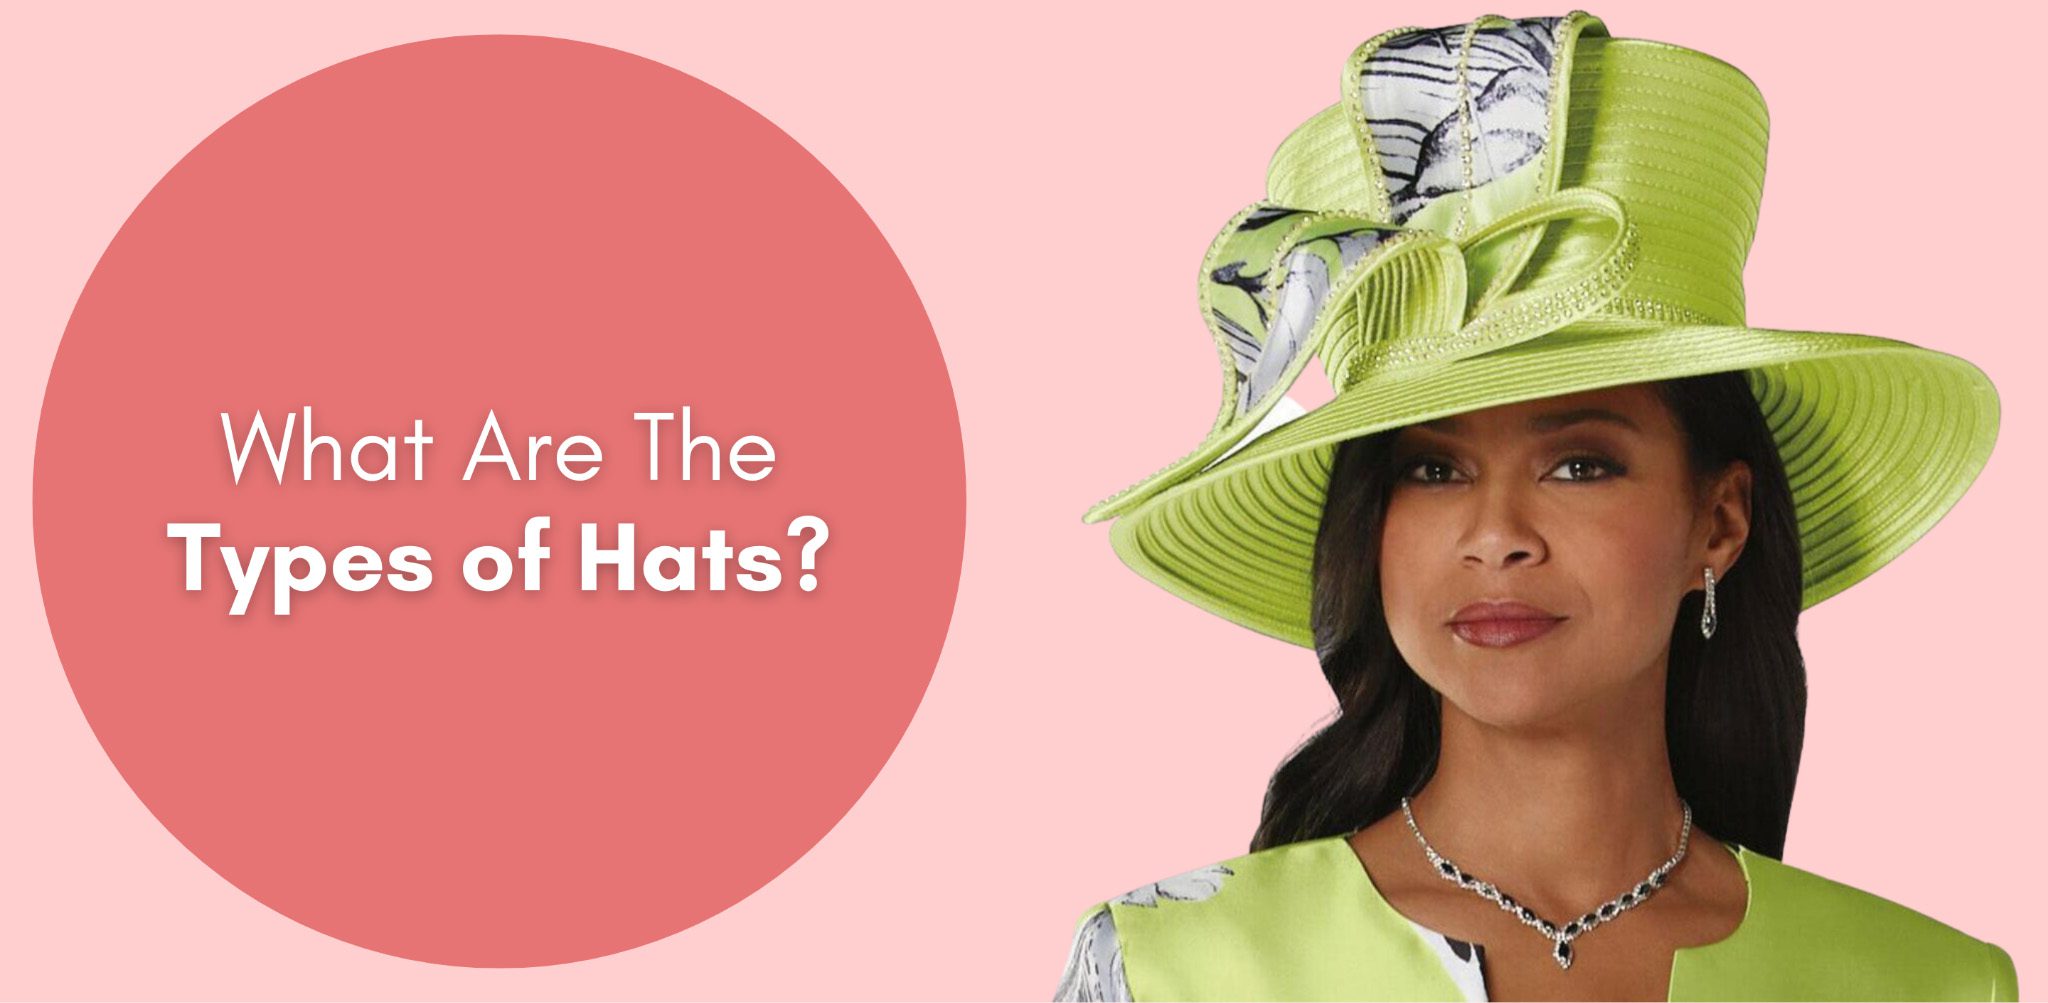 What Are The Types of Hats?